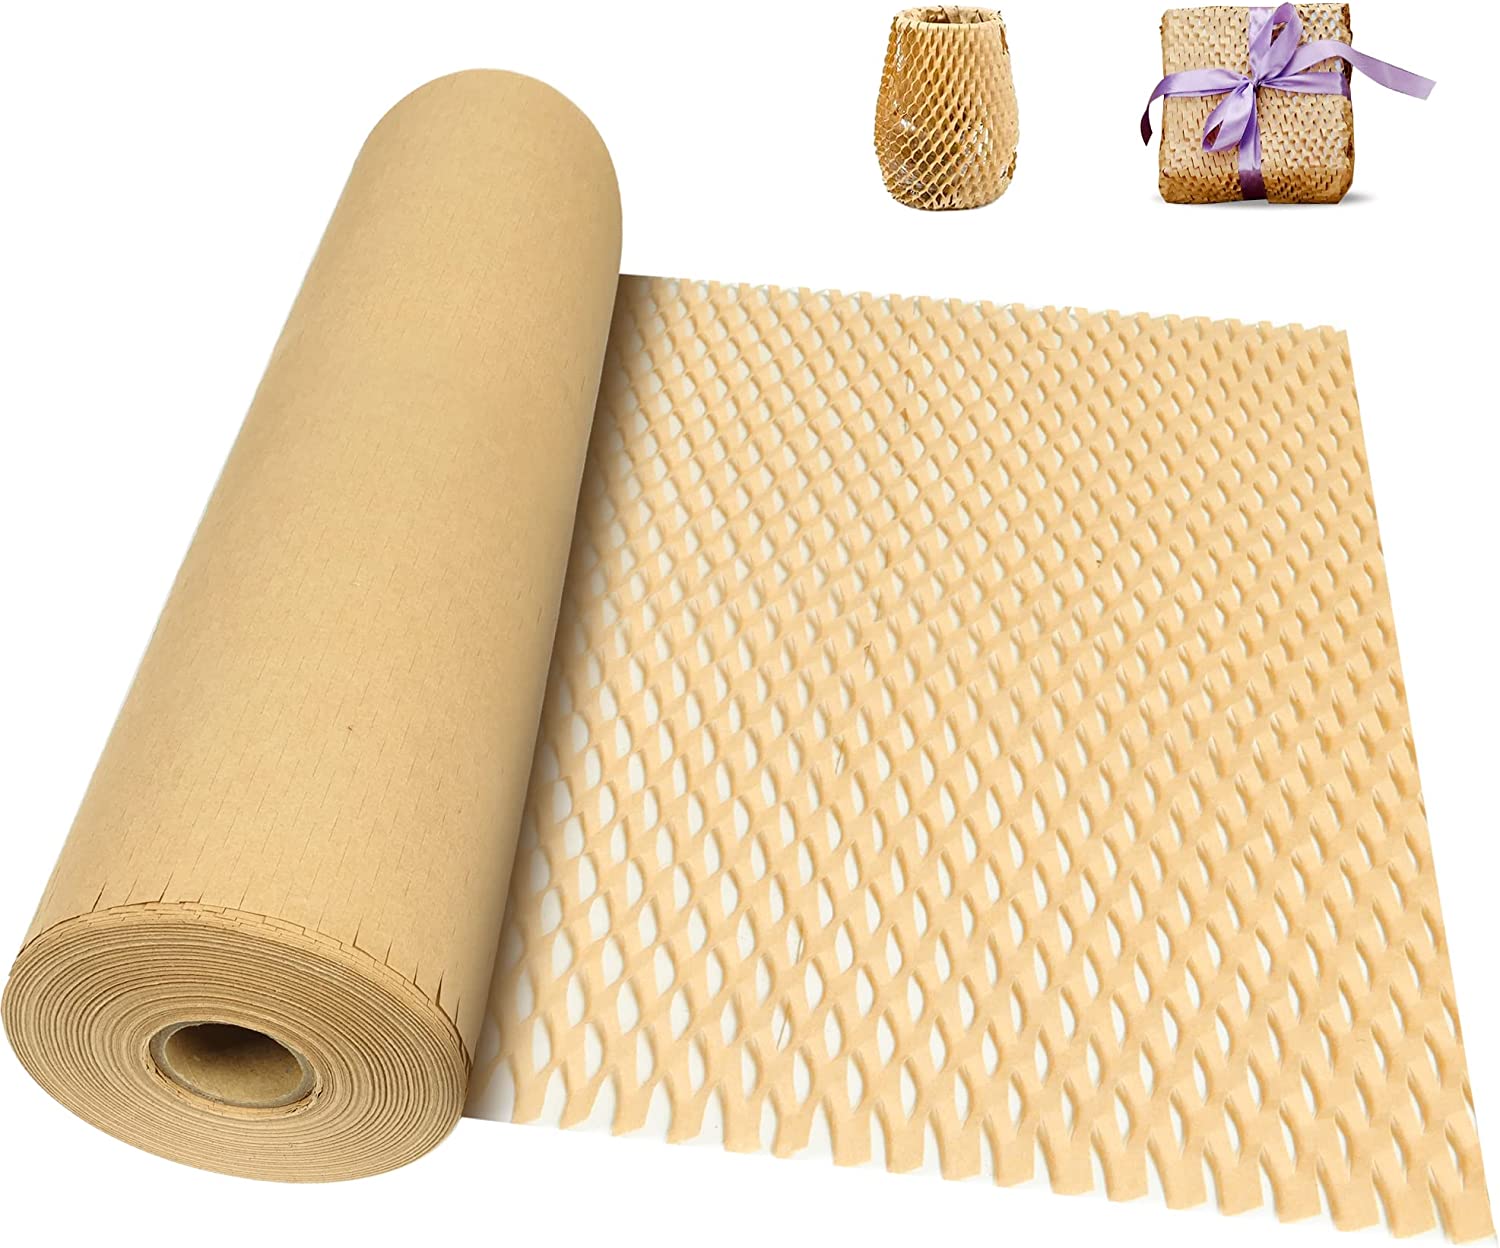 Honeycomb Packing Paper, 15&quot;×135' Protective Recycled Honeycomb Cushioning Wrap Roll Eco Friendly Packaging Material Wrapping Protective Roll Moving Shipping,Packaging Gifts and Transportation